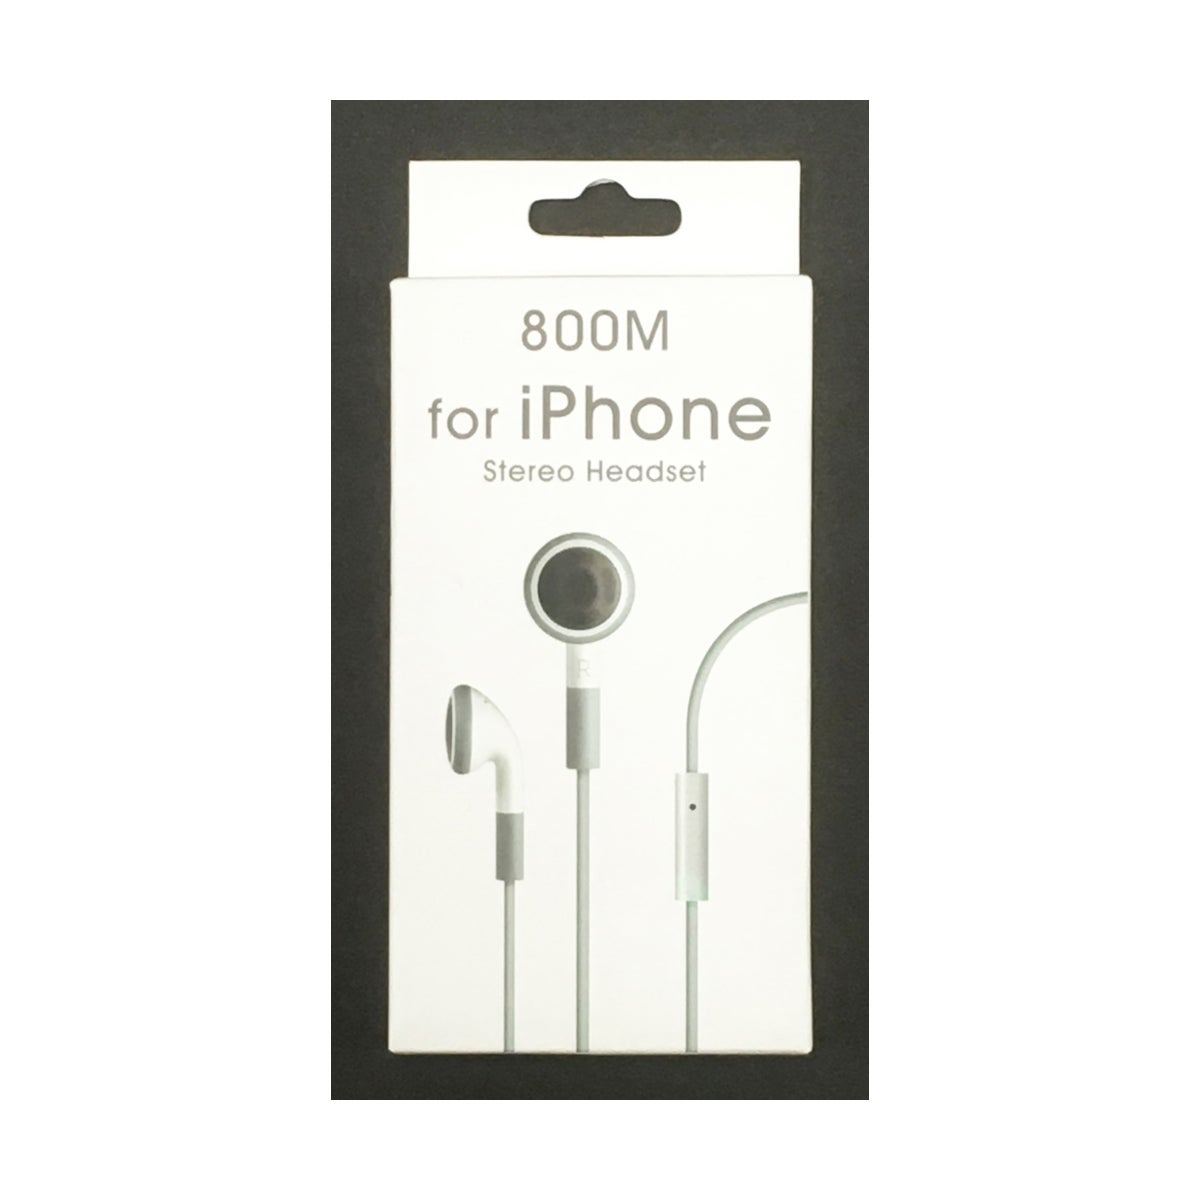 STEREO HEADSET: 800M FOR IPHONE - cellphone & accessories (cp) JADE INTL